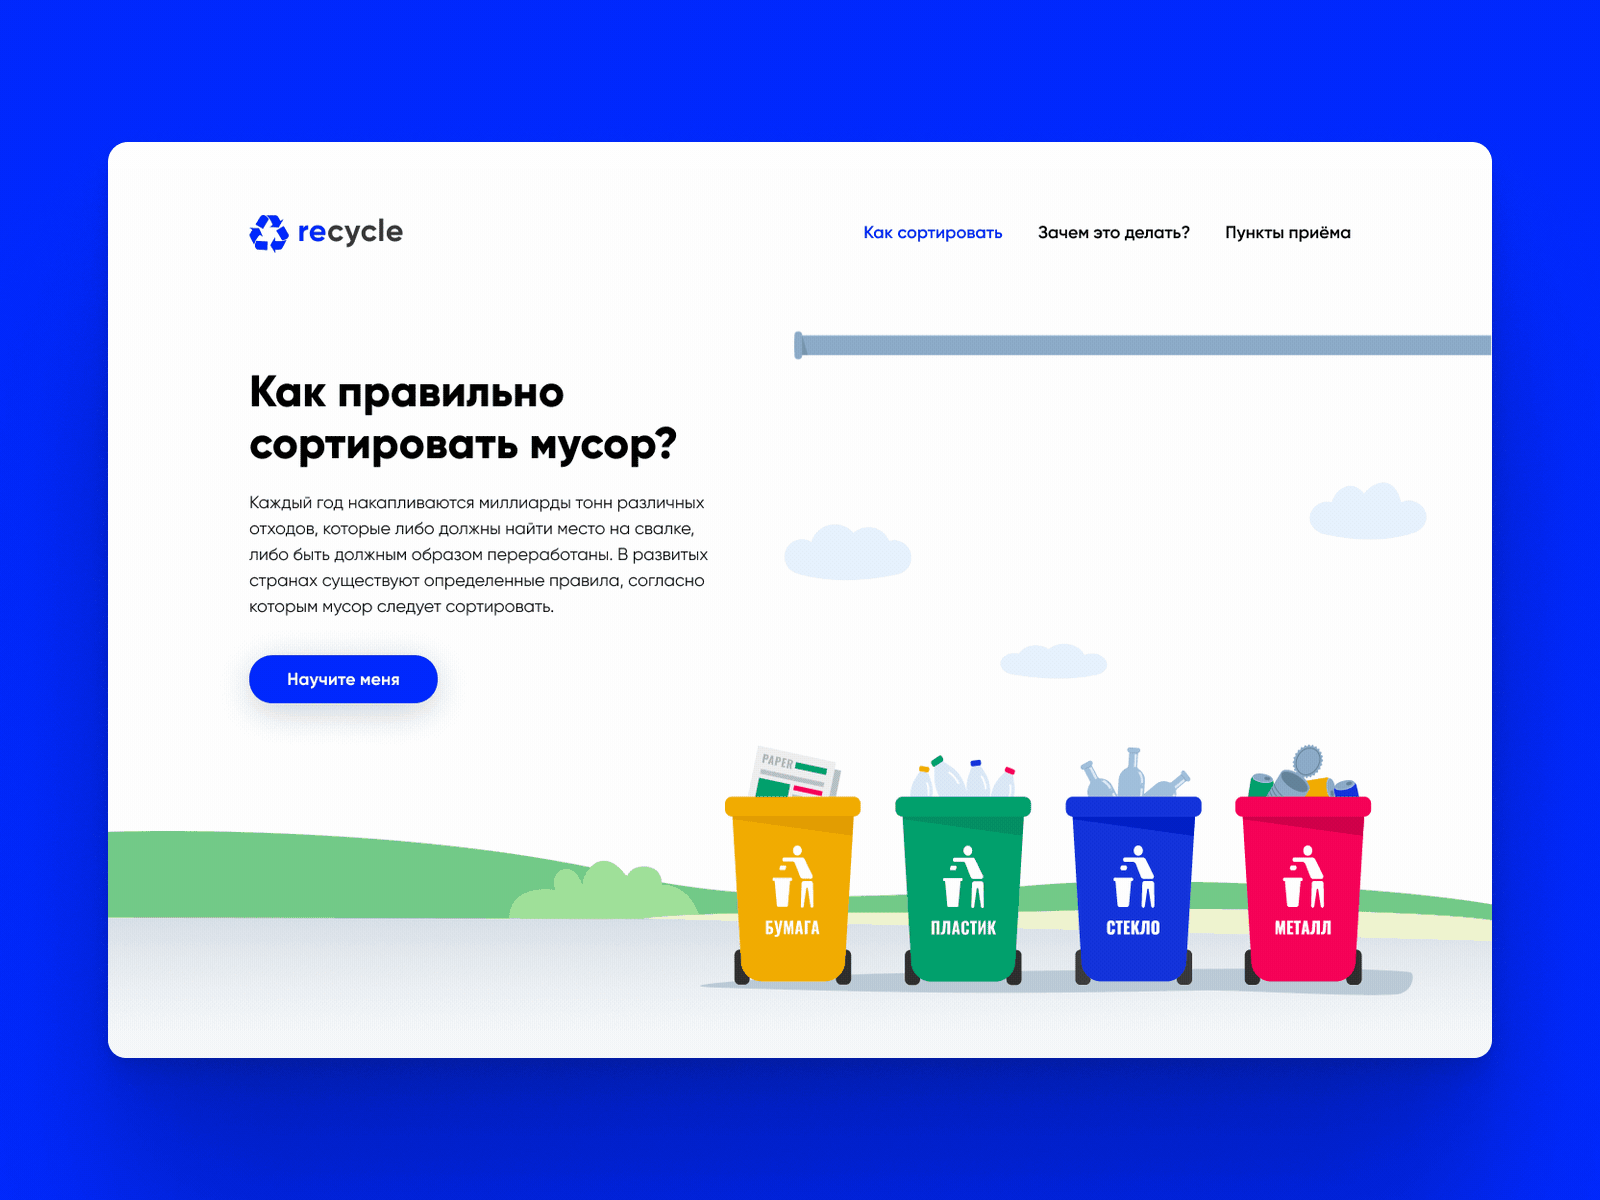 Recycle after effects animation blue ecology environment figma flat garbage illustration informative landing page recycle sorting trash ui vector waste web